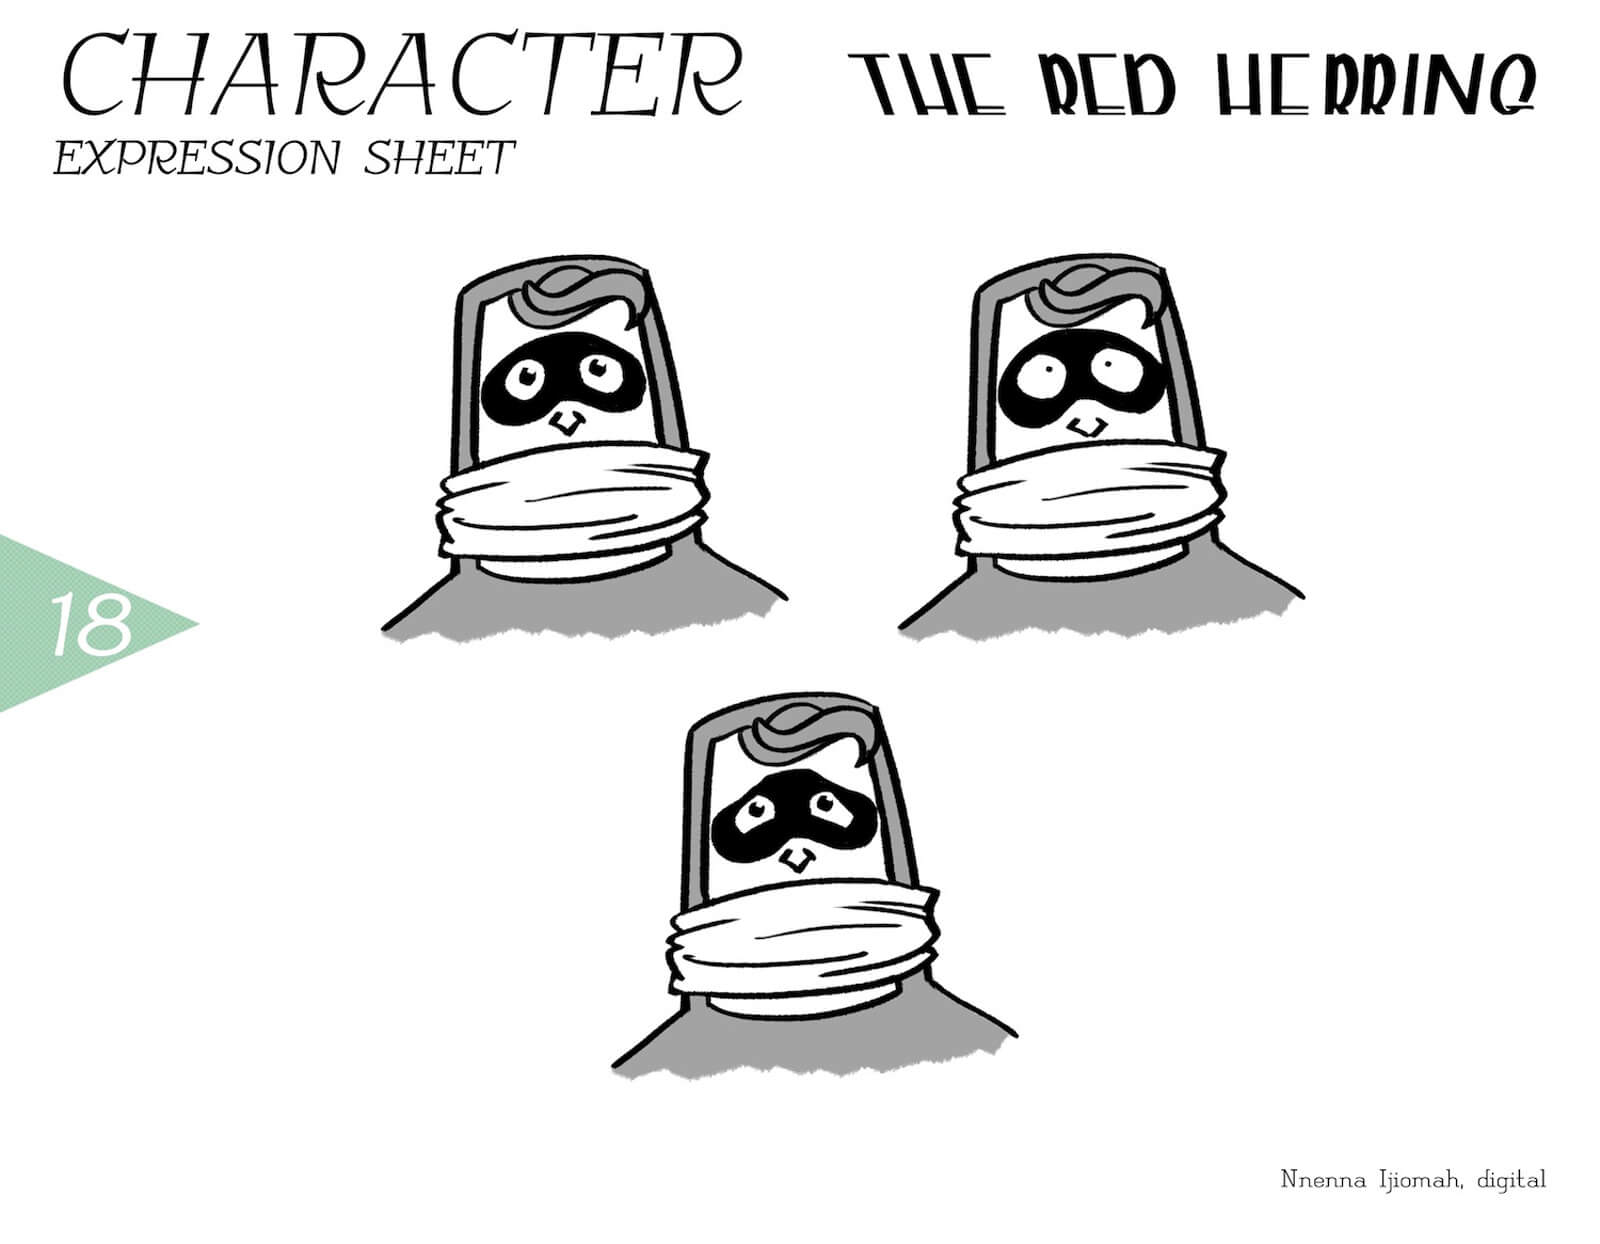 Expression sheet for The Red Herring, depicting black-and-white sketches of surprise and fear